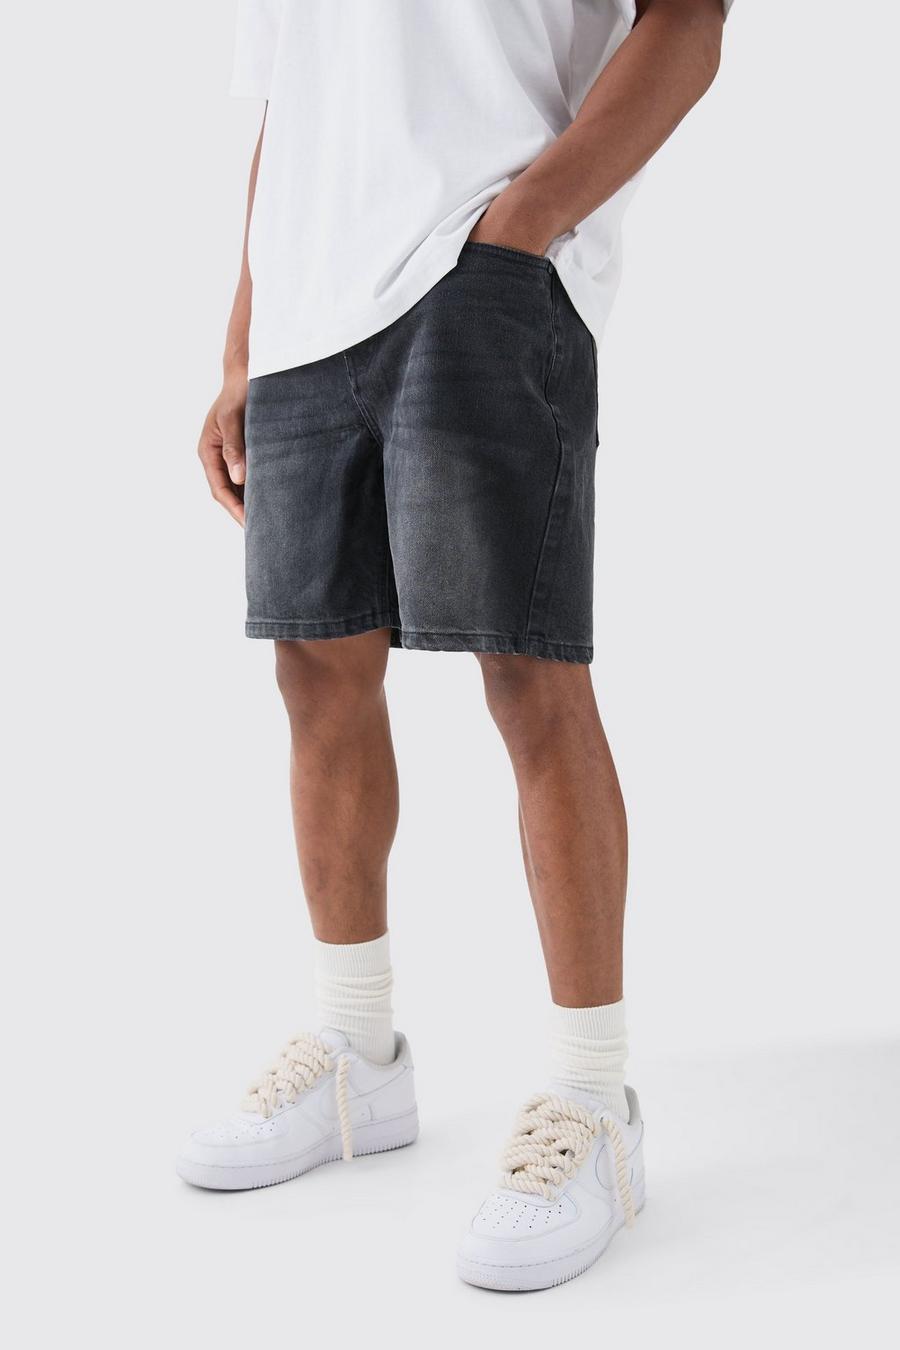 Lockere Jeansshorts in Grau, Charcoal image number 1